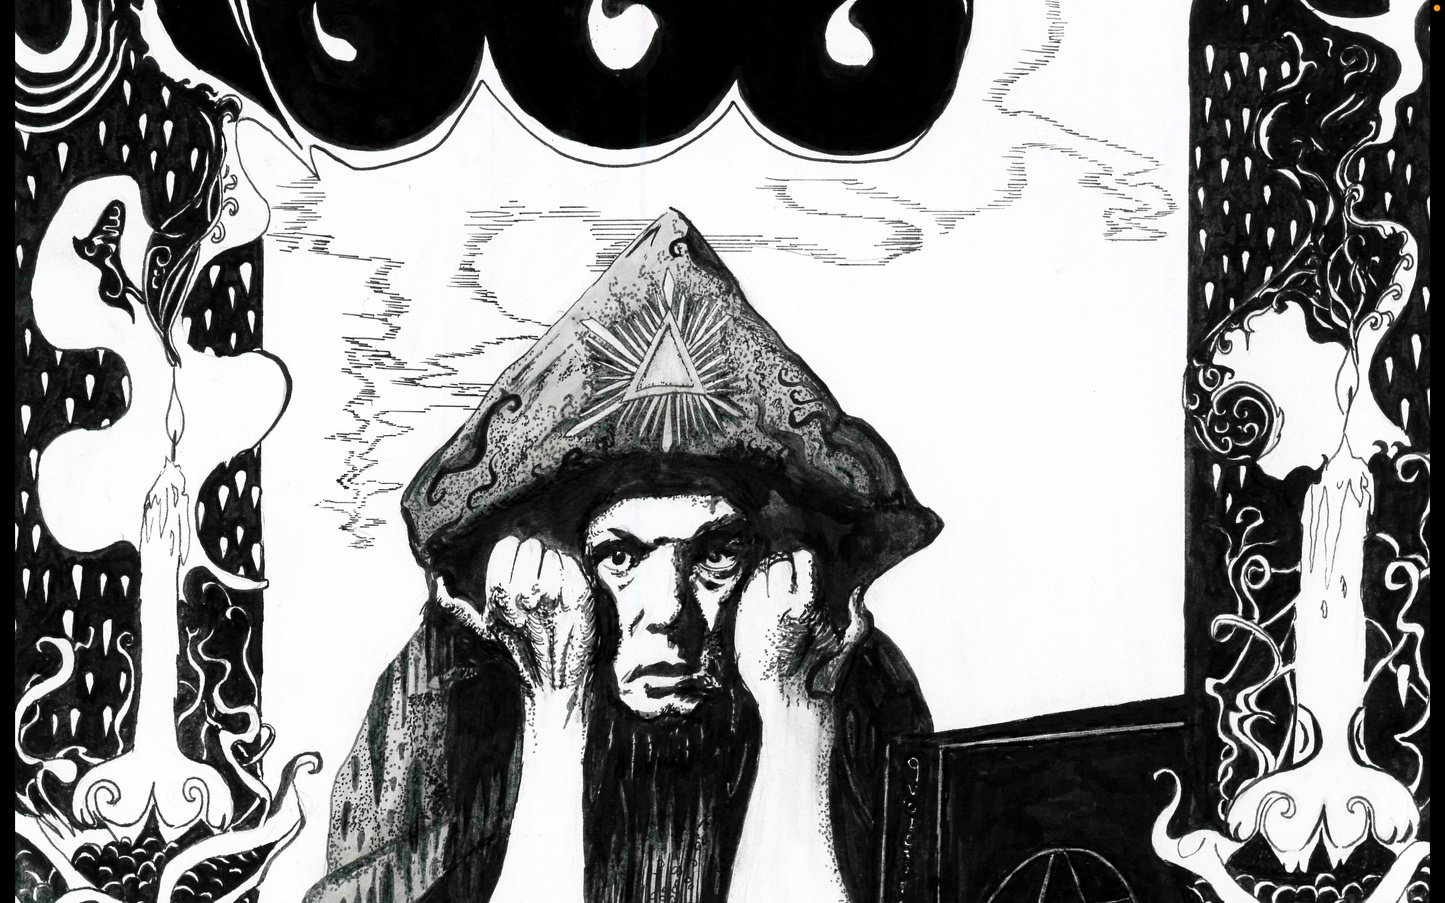 A detail from A black and white pen and ink portrait of Aleister Crowley in a psychedelic art nouveau style, the text above reads The Great Beast 666